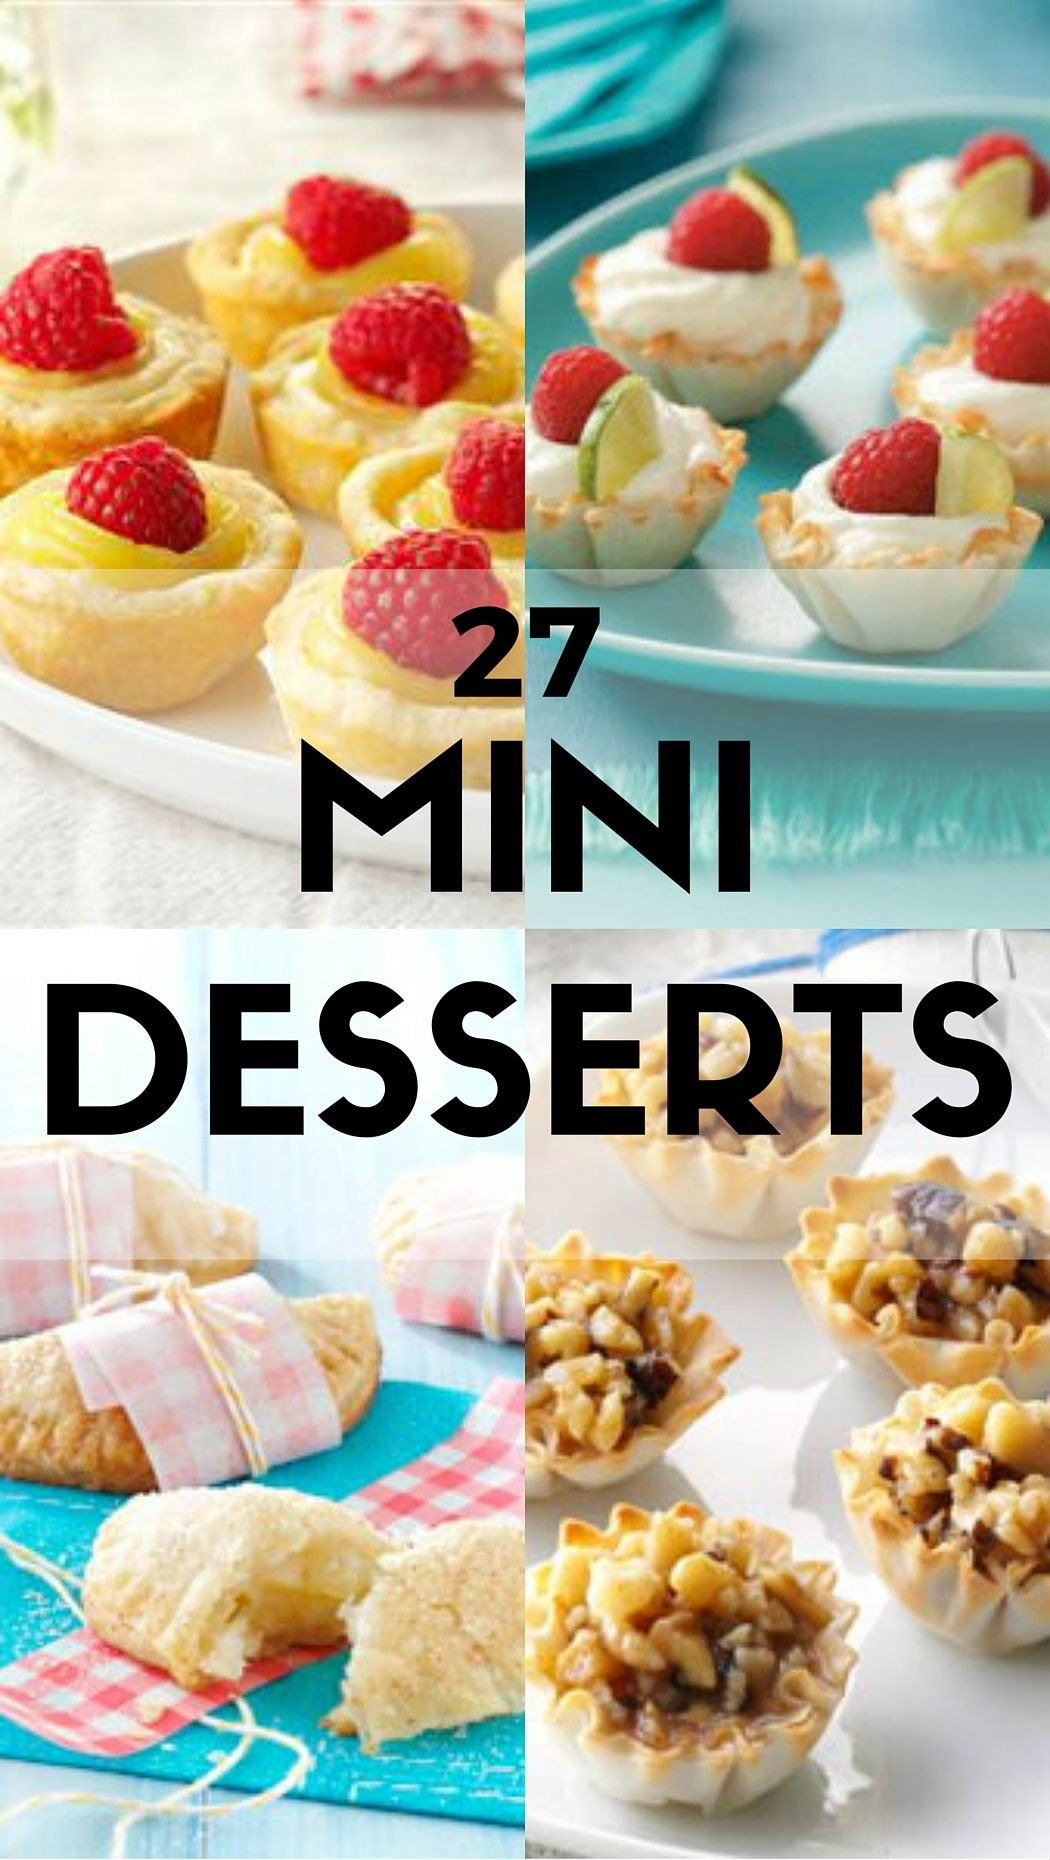 Fall Desserts 2019
 32 Absolutely Adorable Mini Desserts You’ll Fall in Love